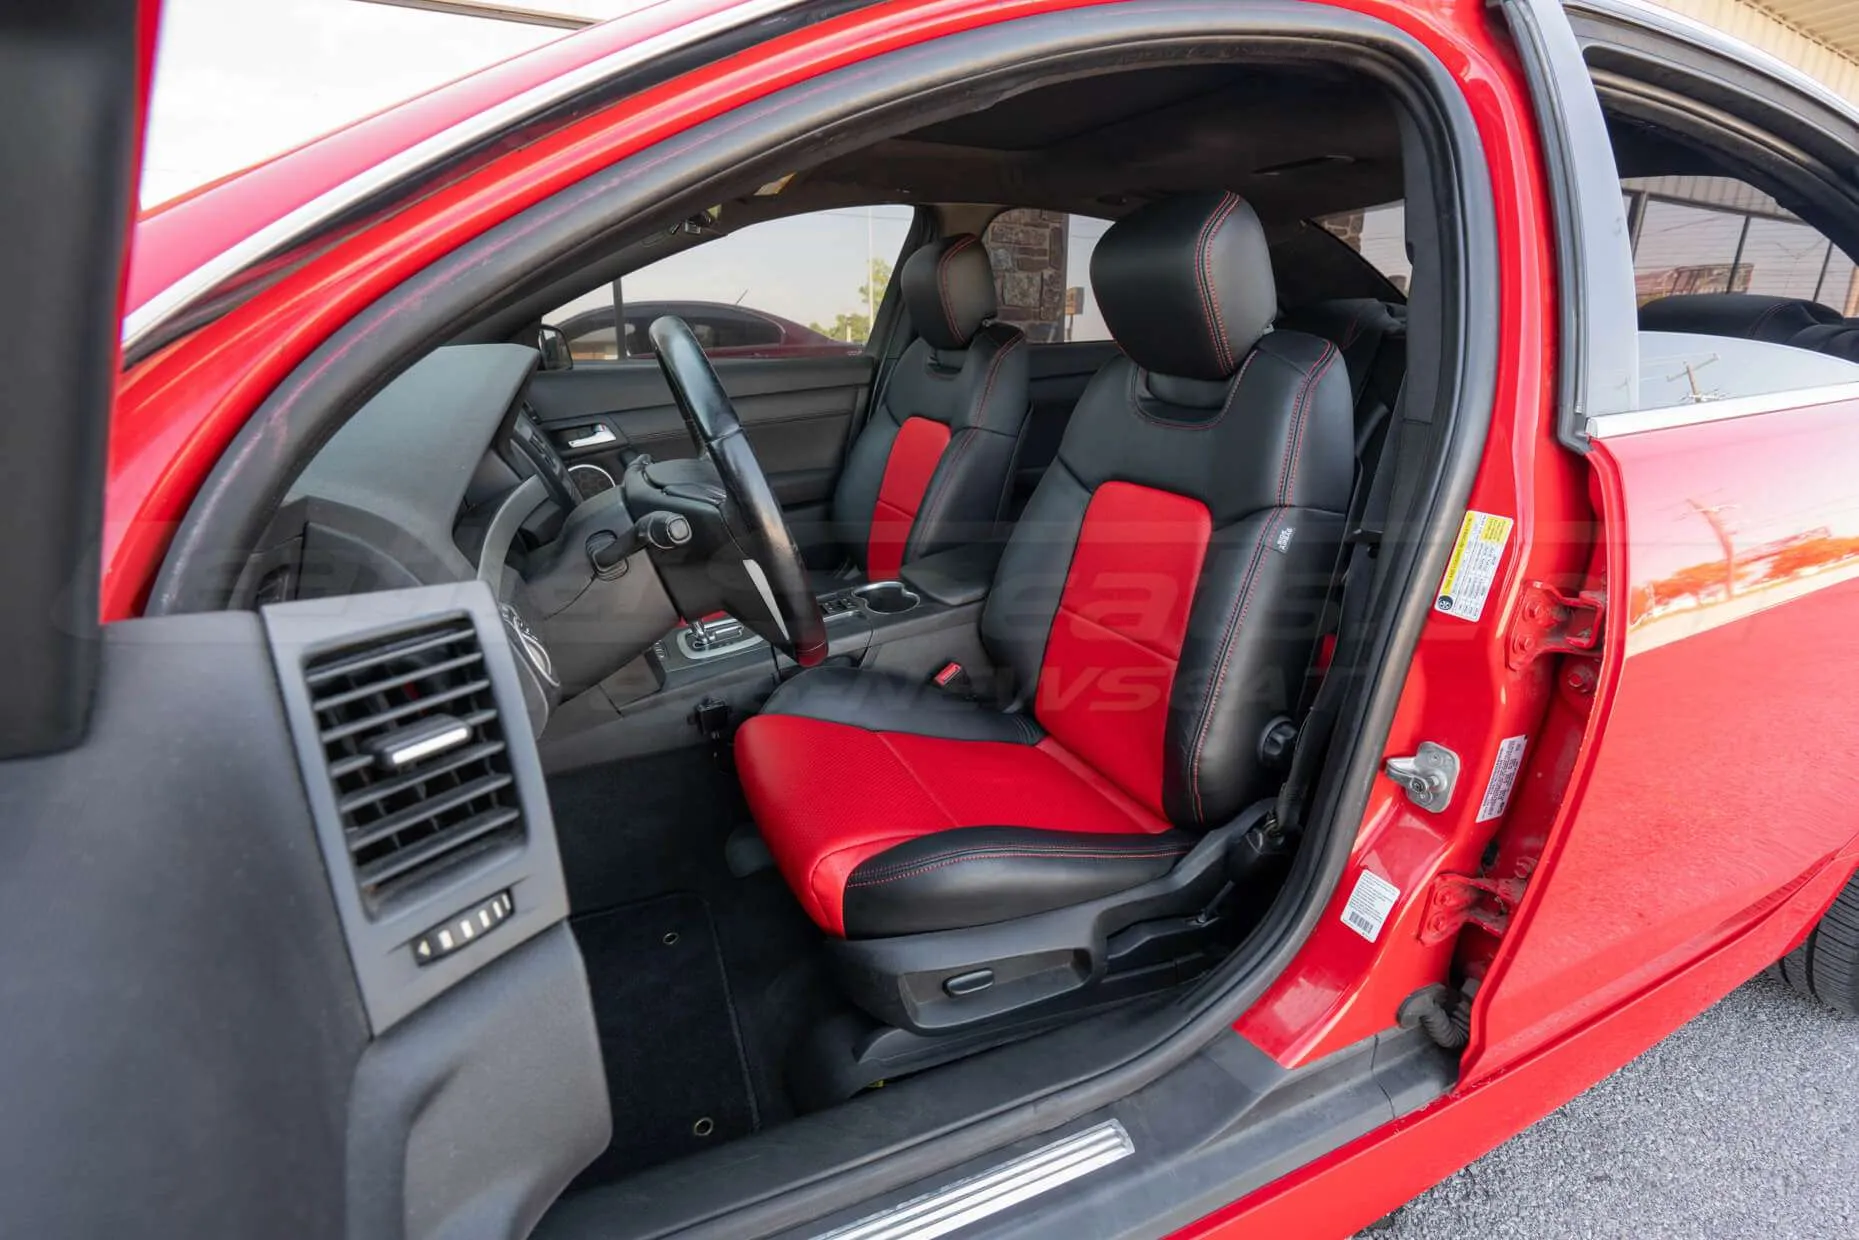 2009 Pontiac G8 with Black and Red leather seats with perforated combo and bright red stitching